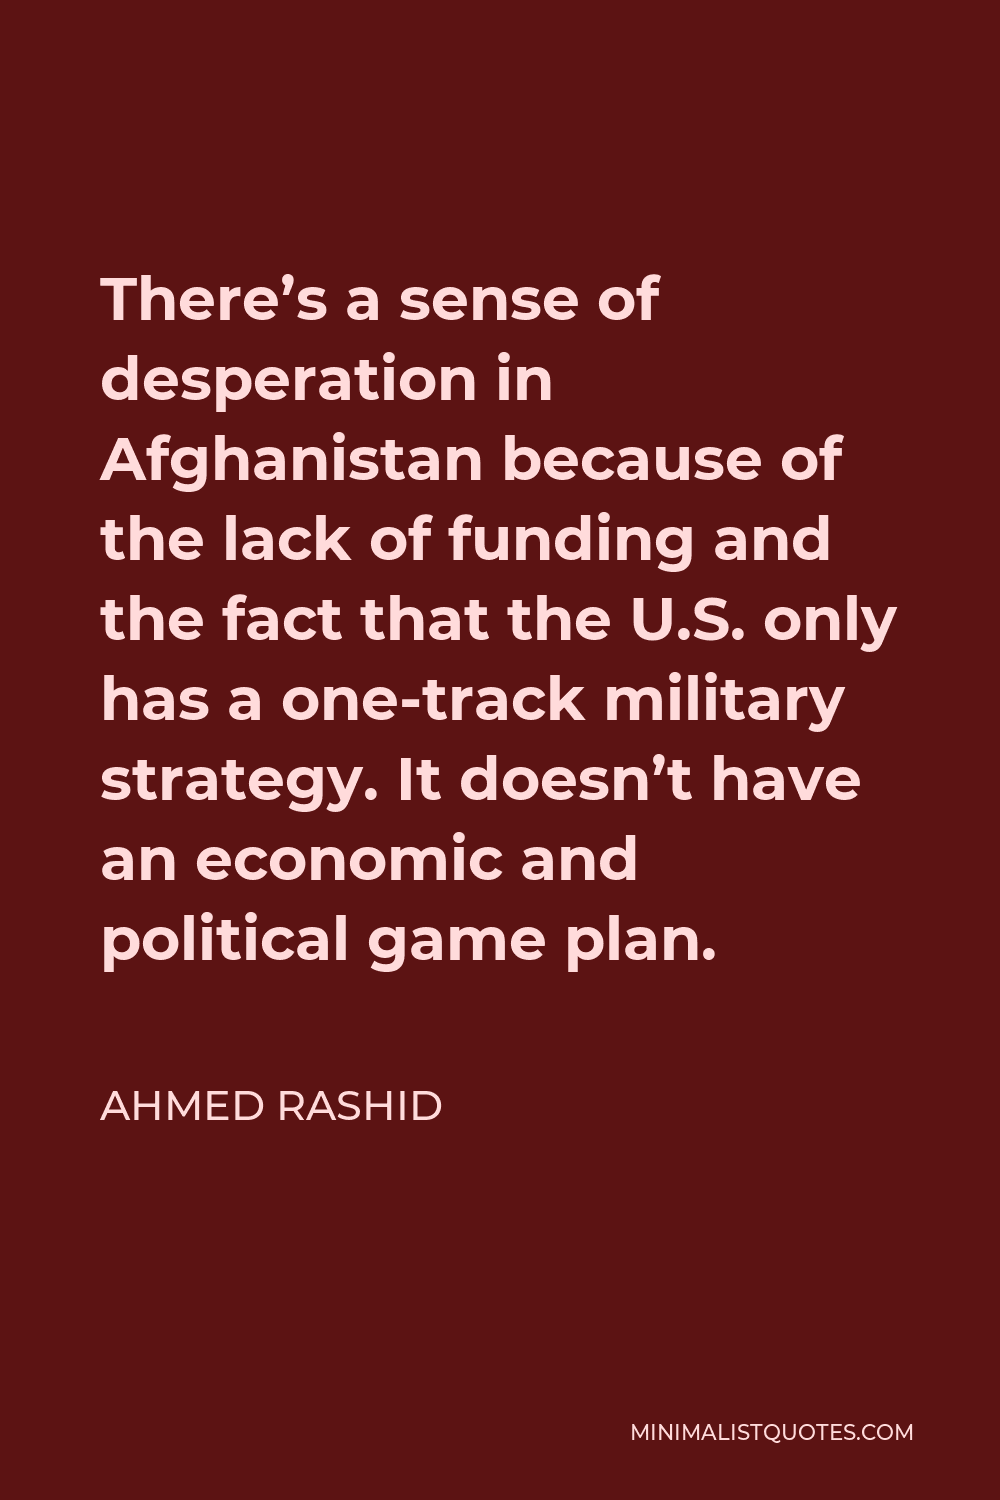 Ahmed Rashid Quote - There’s a sense of desperation in Afghanistan because of the lack of funding and the fact that the U.S. only has a one-track military strategy. It doesn’t have an economic and political game plan.